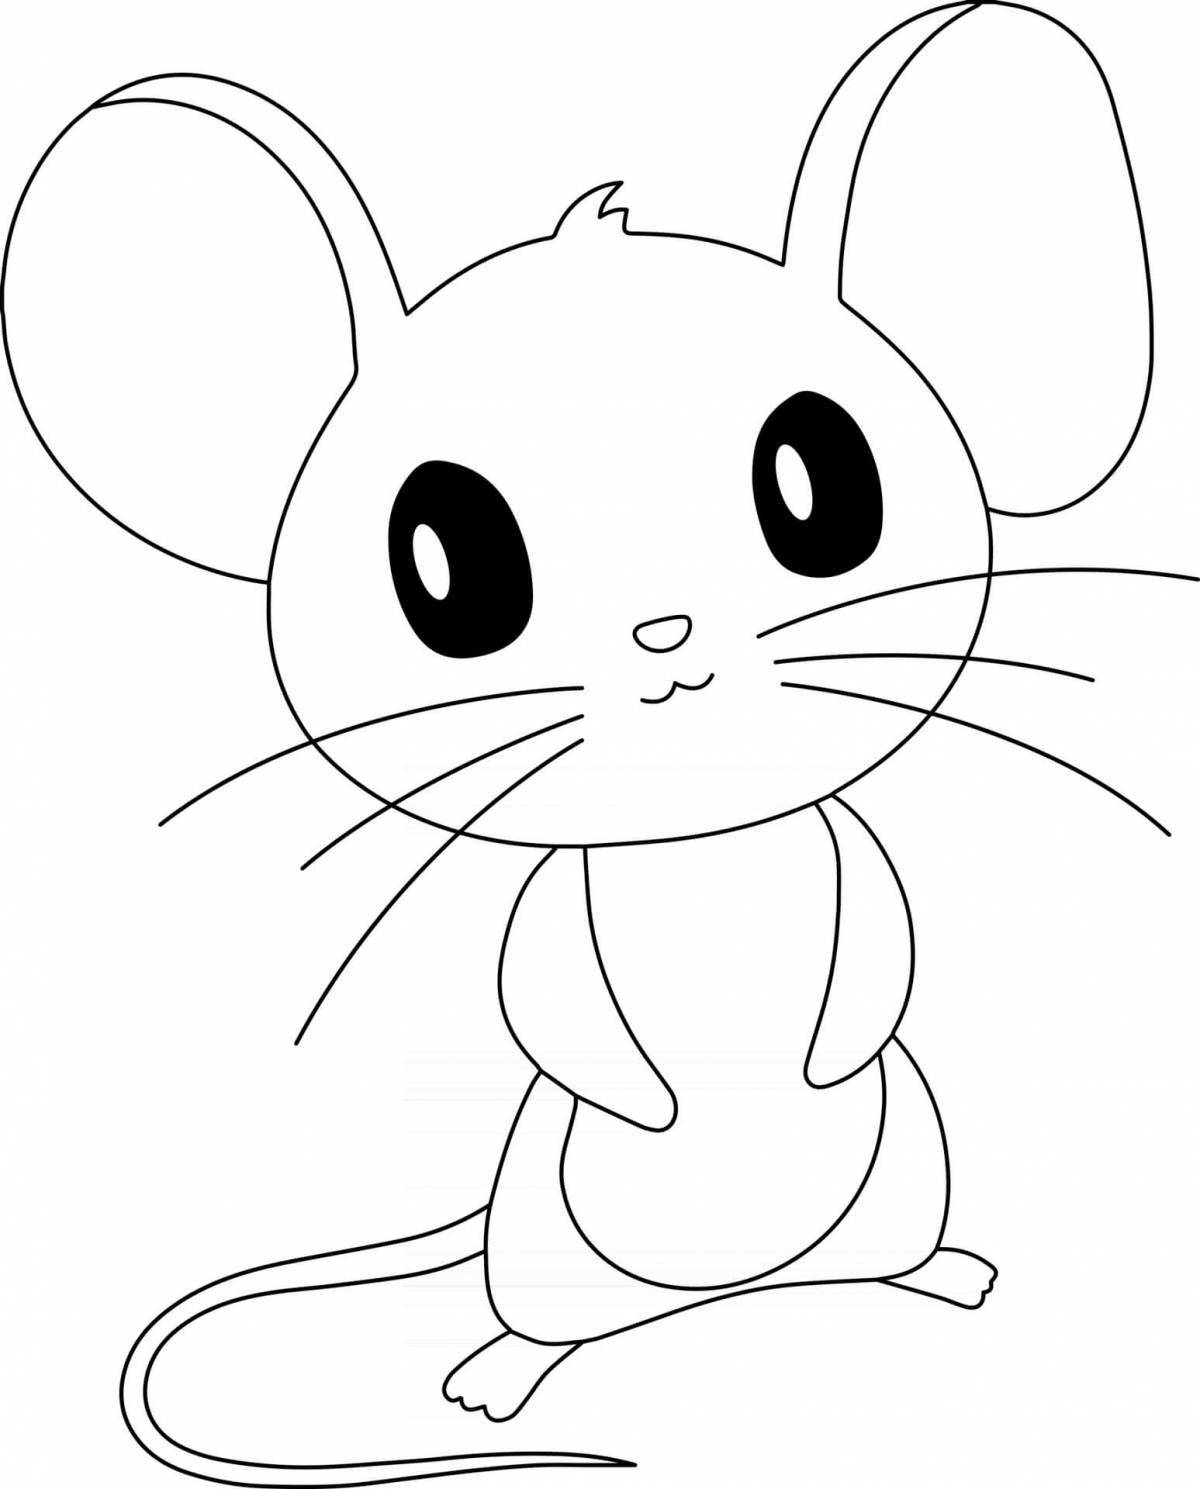 Creative mouse coloring book for 4-5 year olds